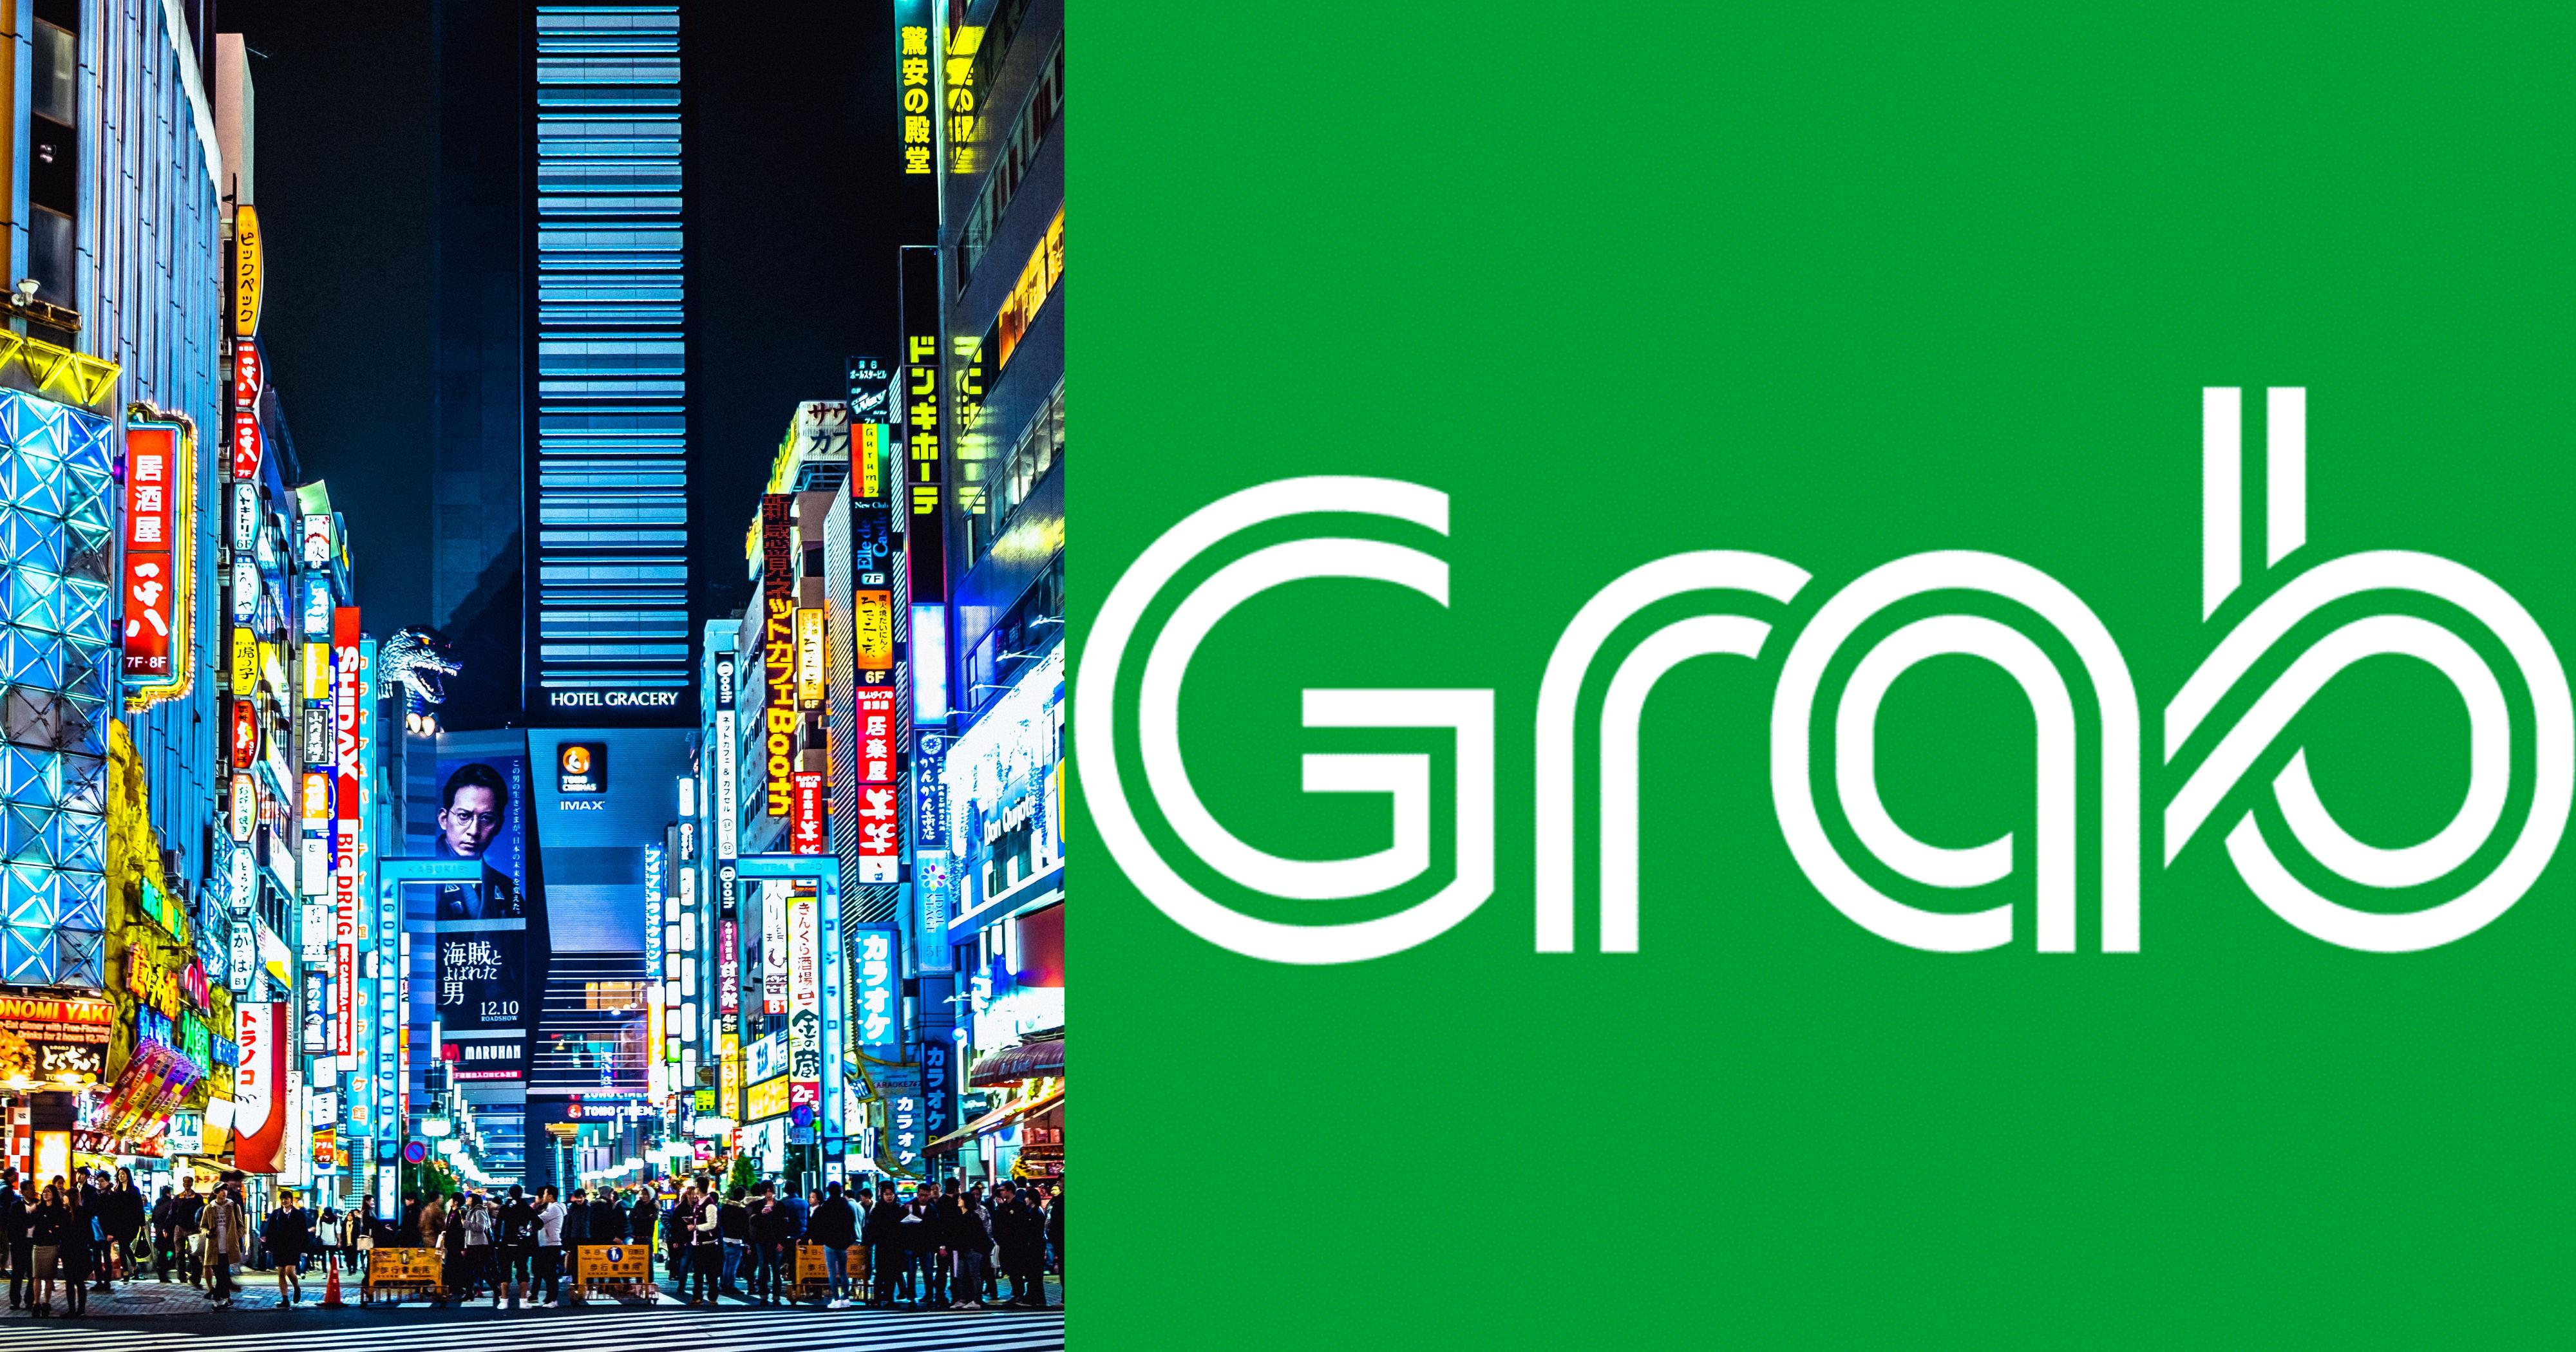 S’pore Grab users can now book rides in Japan & the Middle East from Nov. 19, 2019